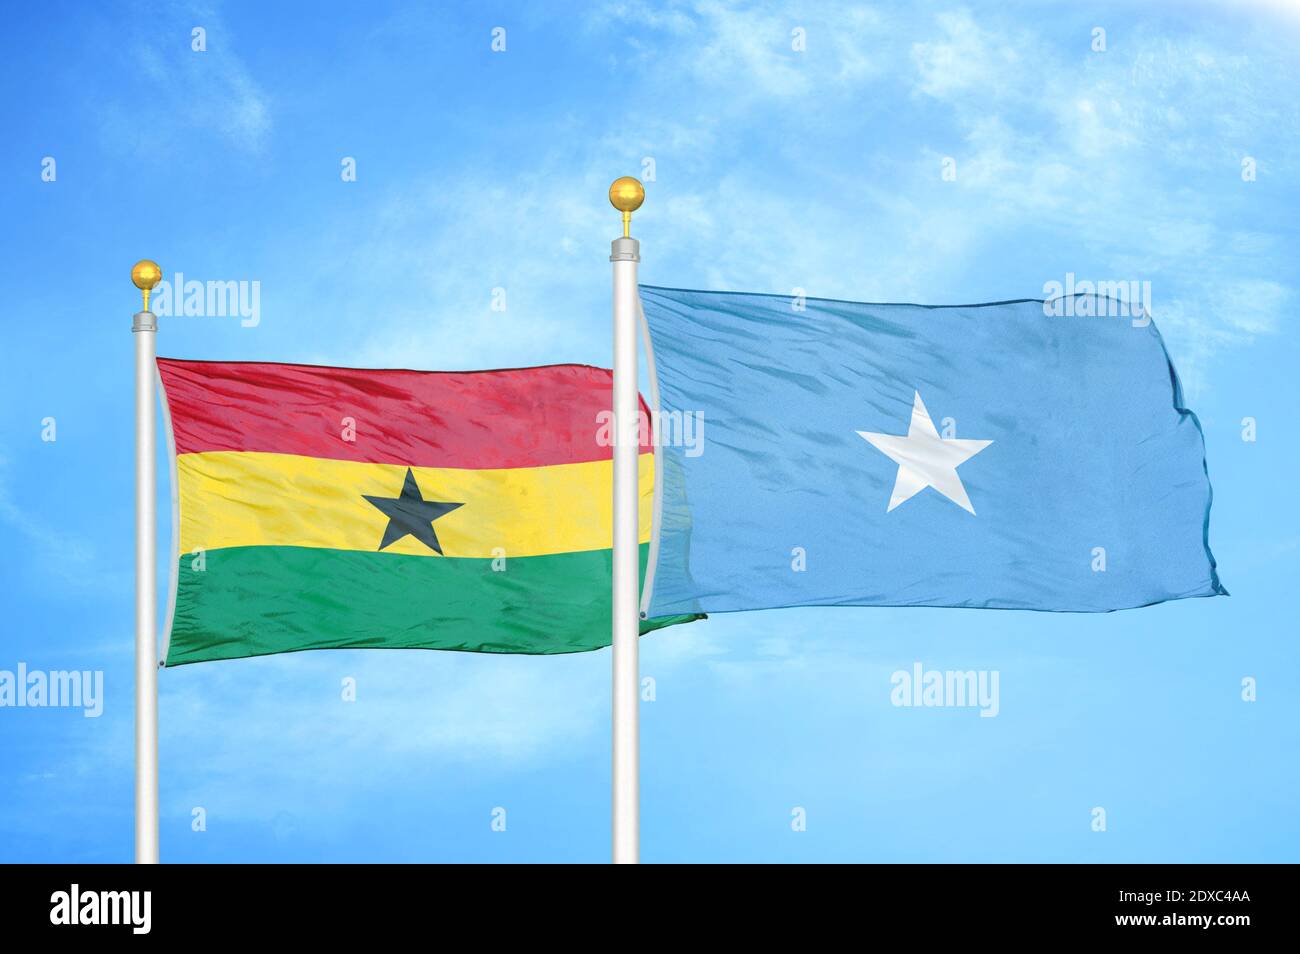 Ghana and Somalia two flags on flagpoles and blue sky Stock Photo